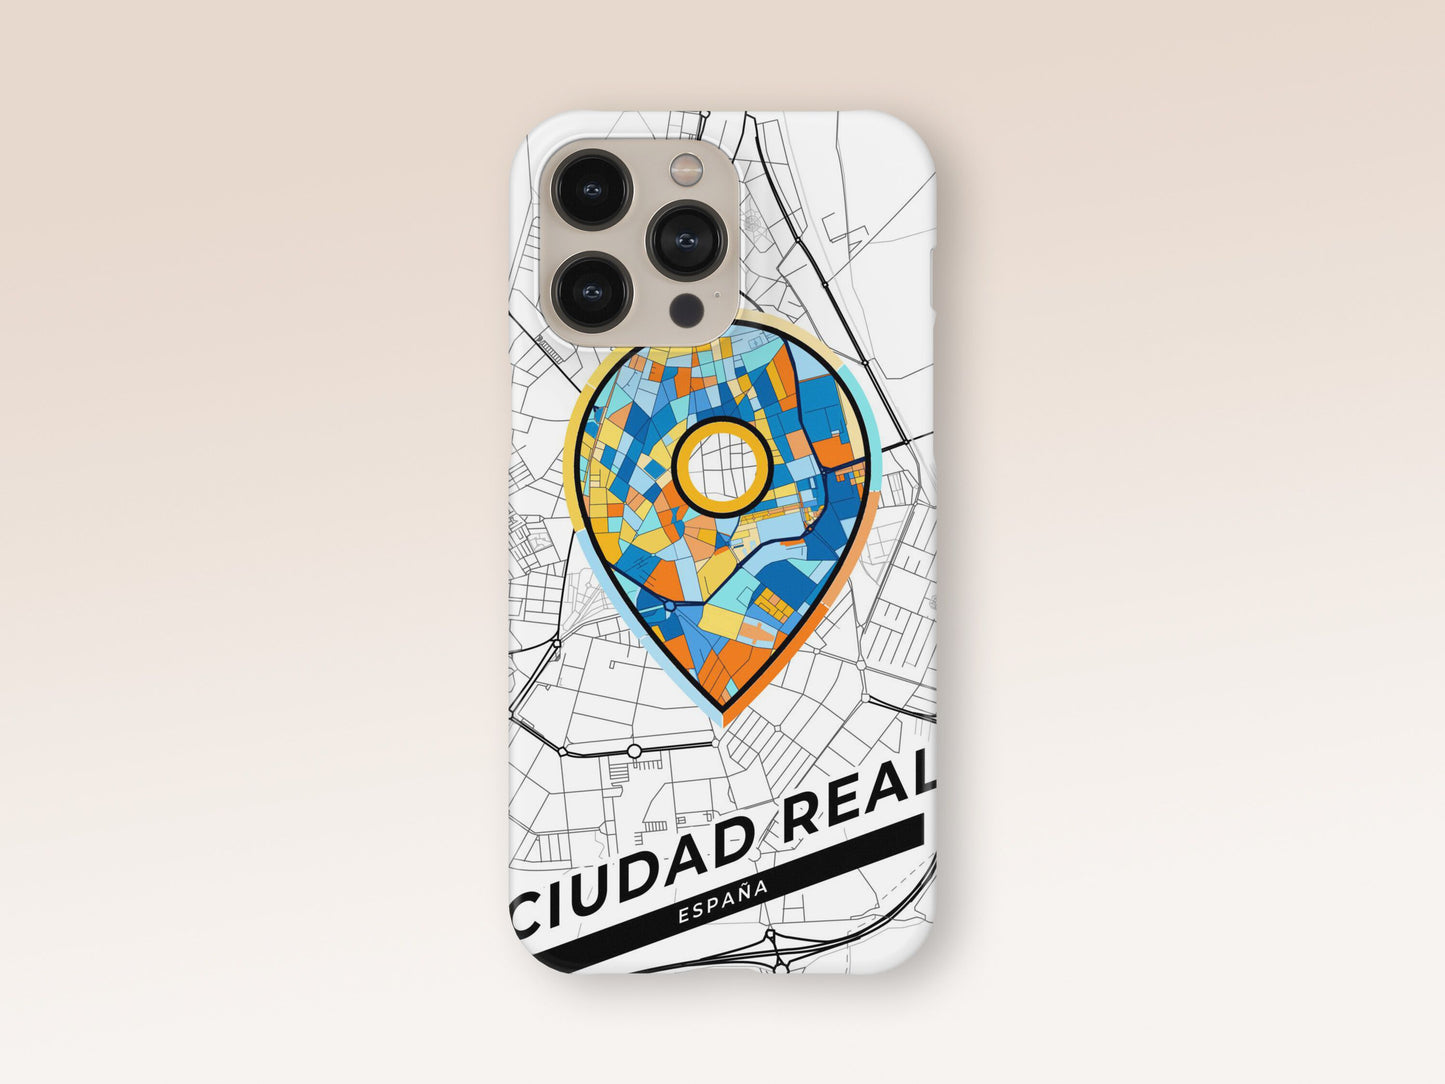 Ciudad Real Spain slim phone case with colorful icon. Birthday, wedding or housewarming gift. Couple match cases. 1